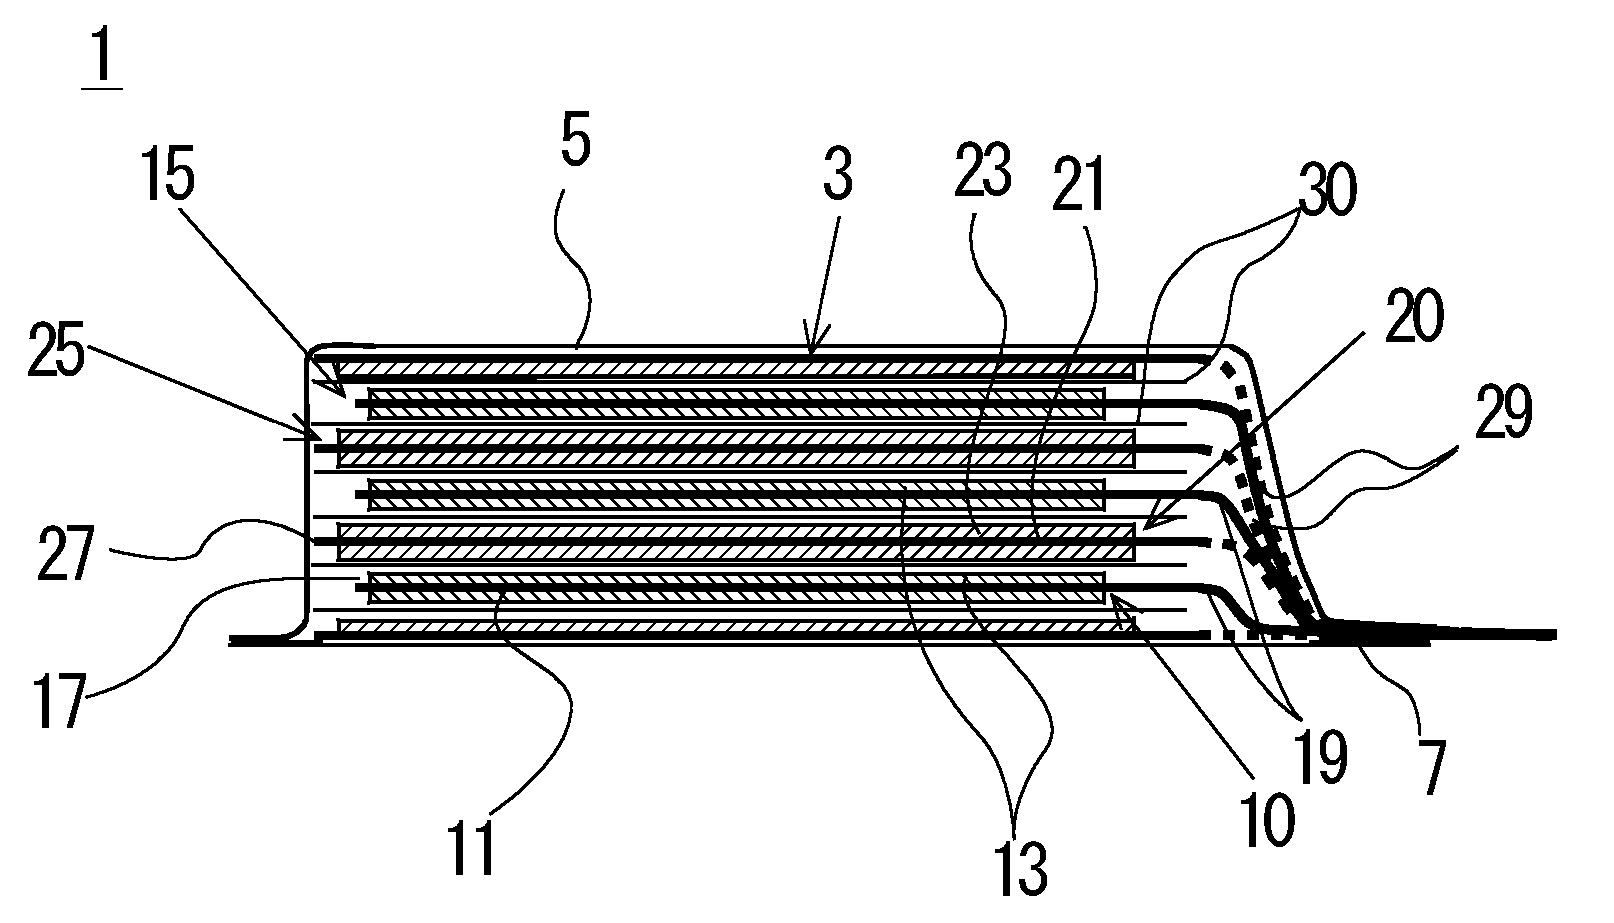 Stacked secondary battery and method of manufacturing the same